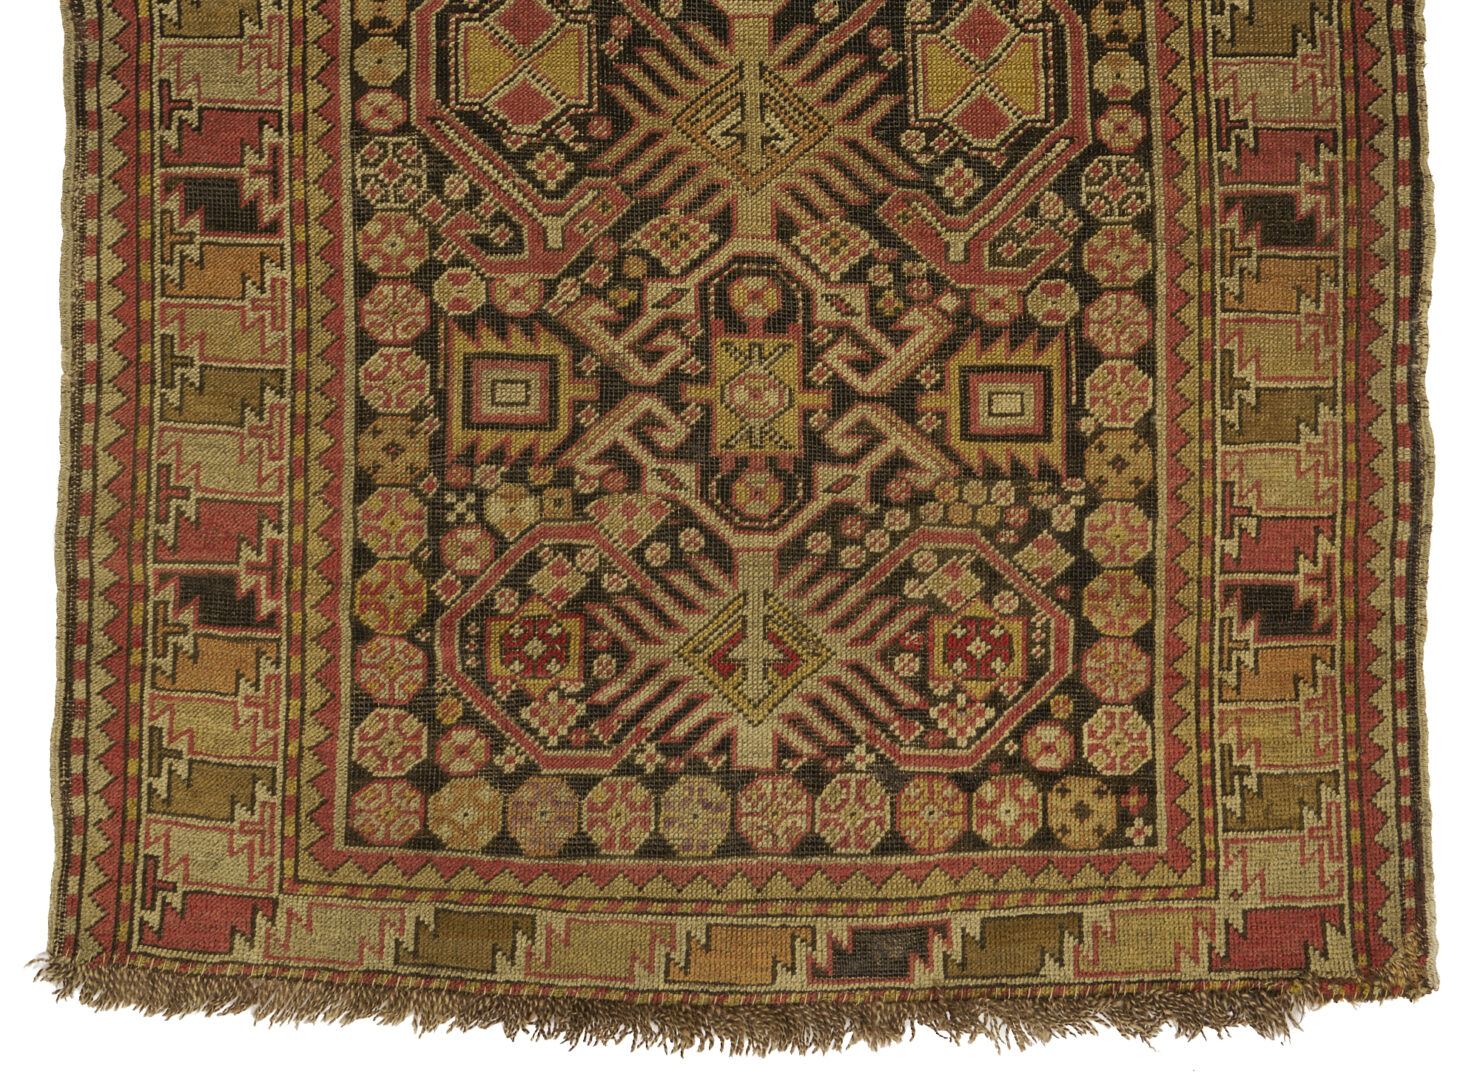 Lot 383: Two Woolen Area Rugs, Serapi and Kazak; Approx. 6' x 4'